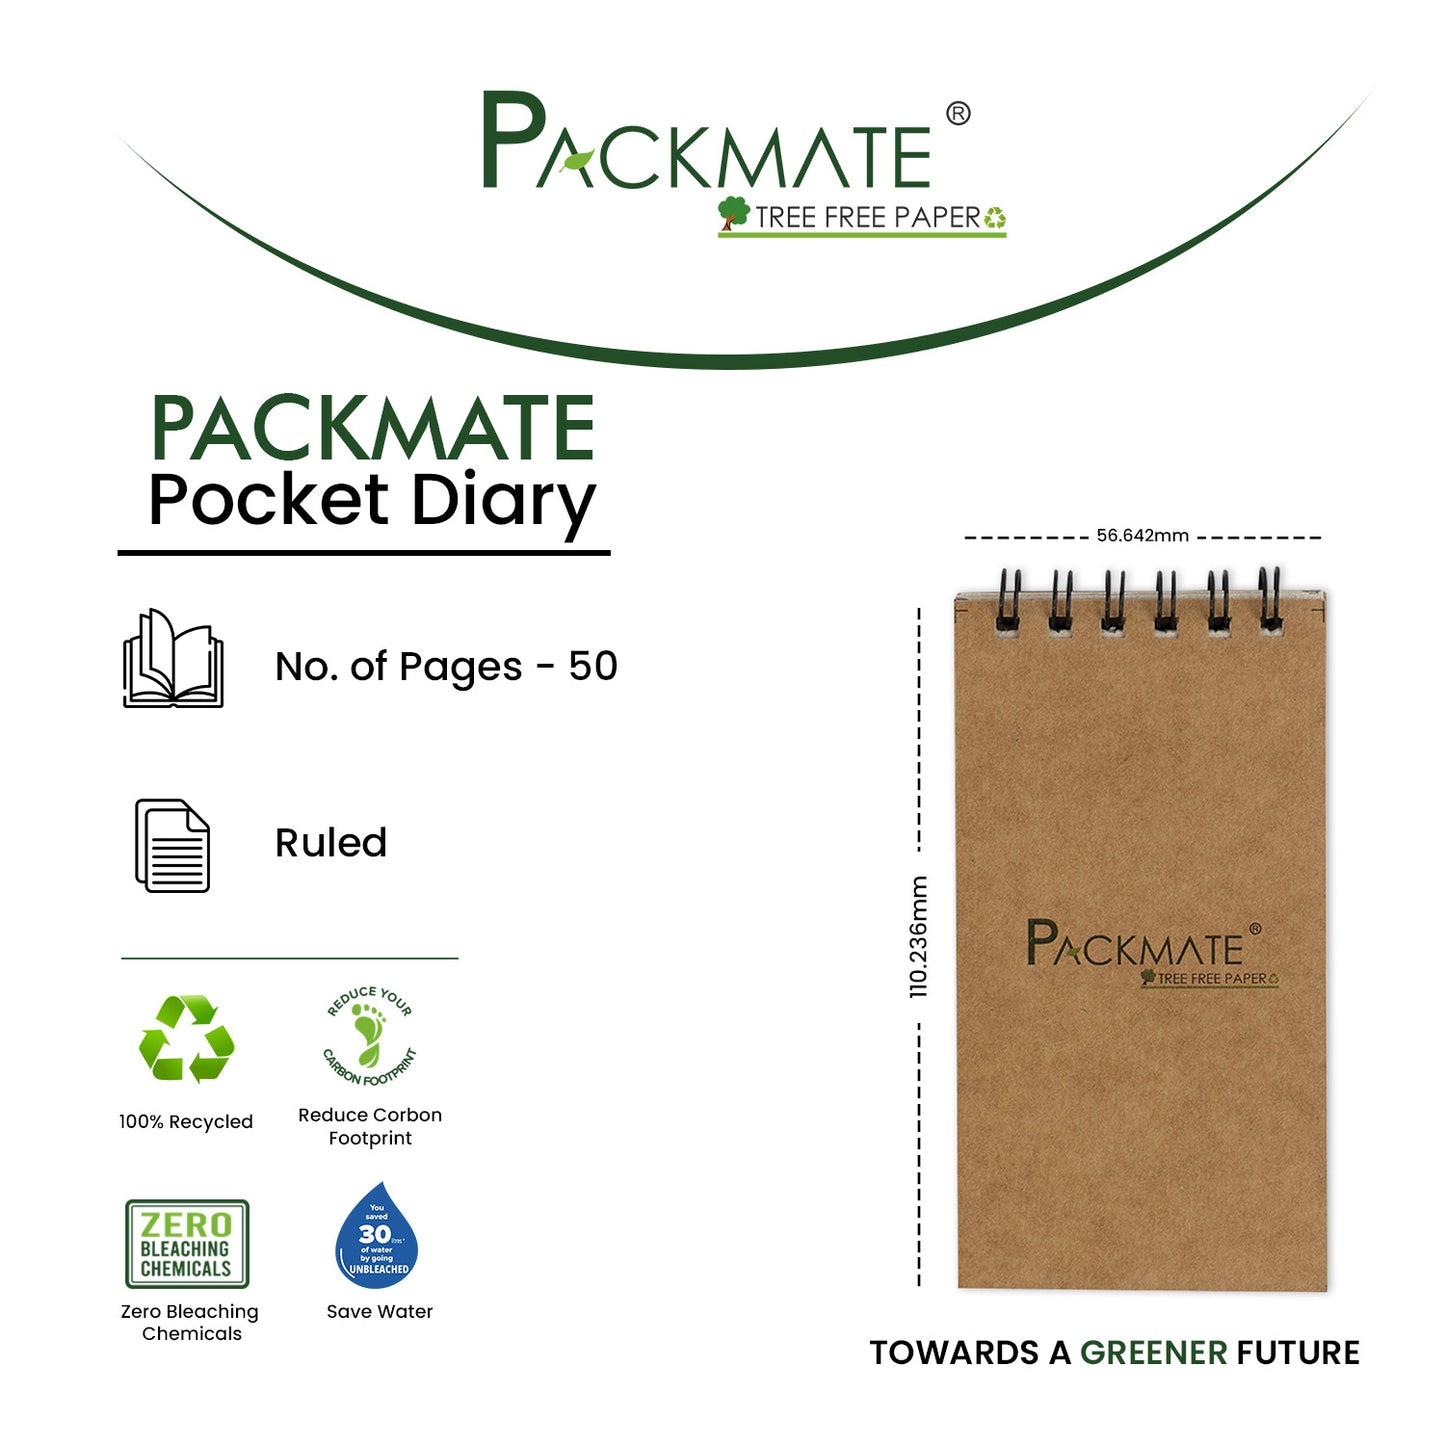 Packmate Pocket Diary | Pack of 10 | Made from 100% Recycled Paper